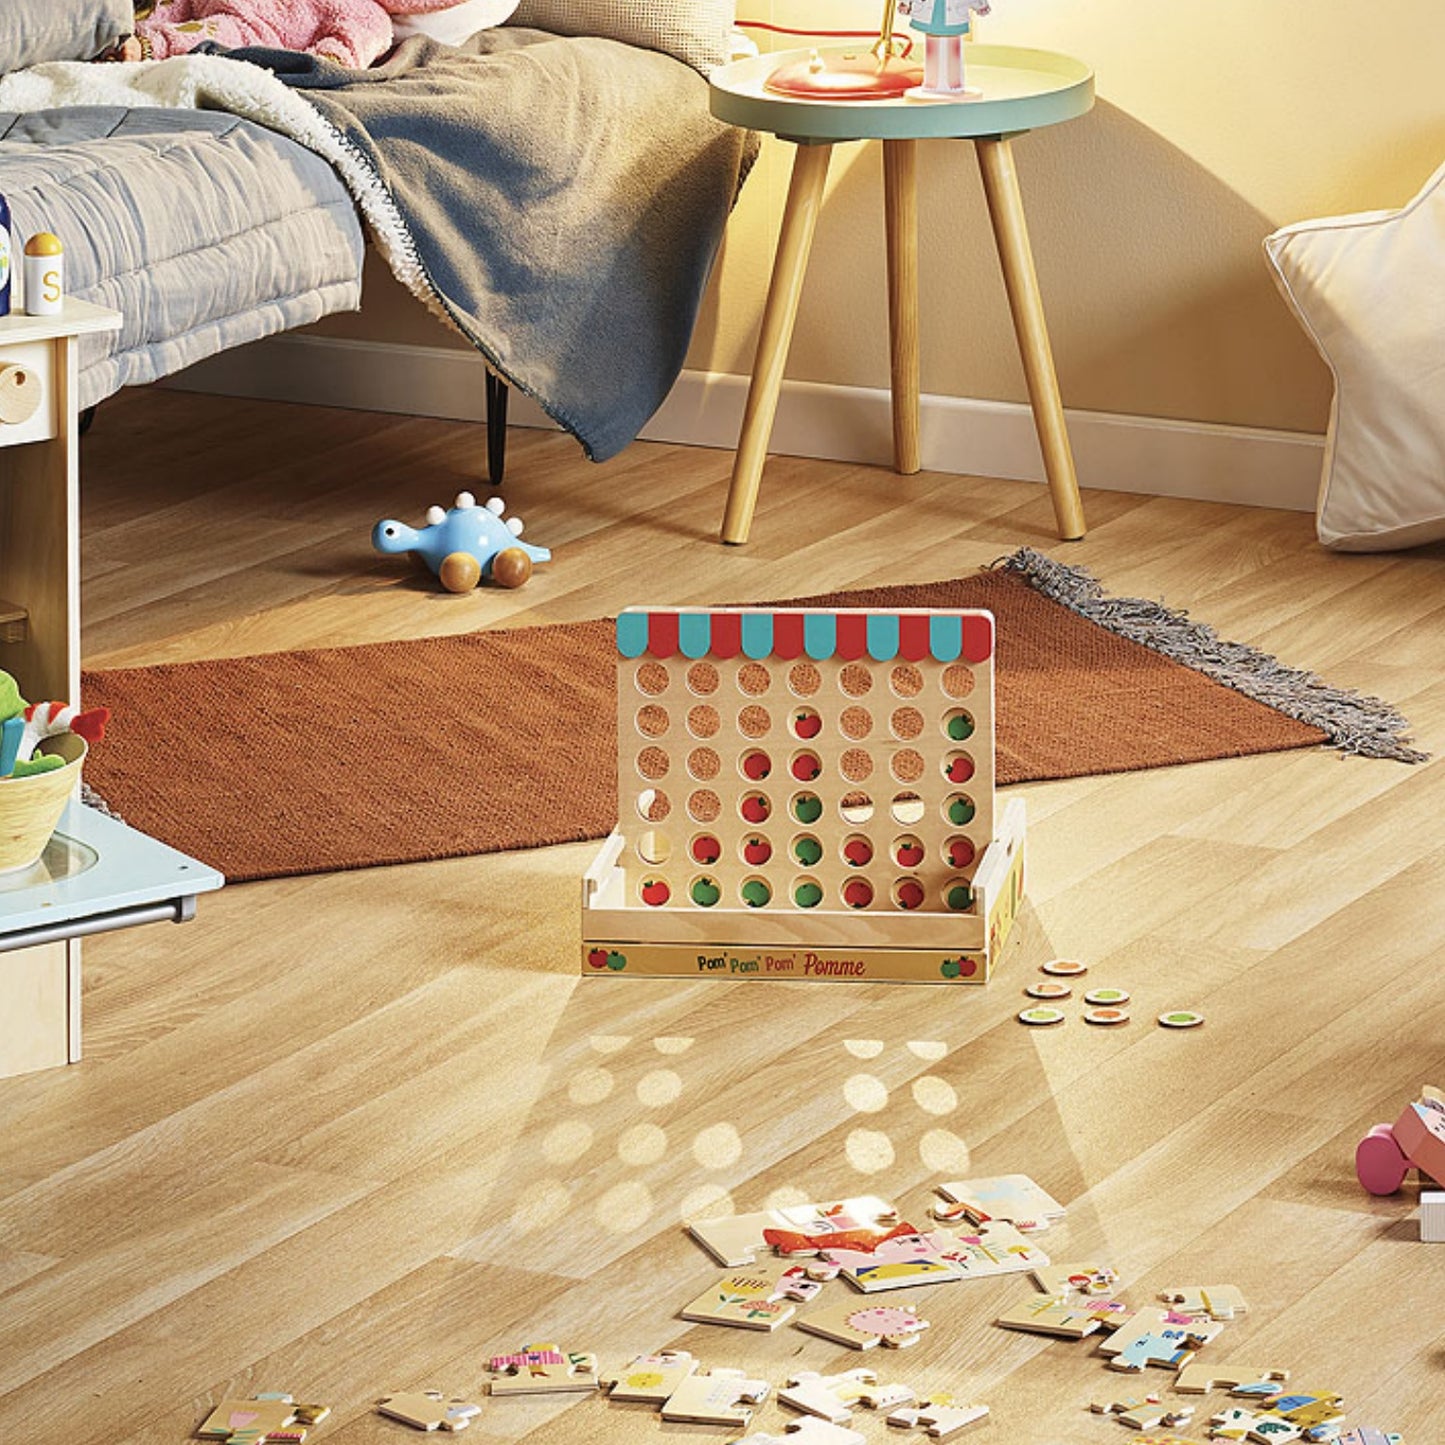 ‘Four Apples In A Row’ Game designed by Ingela P.Arrhenius | Wooden Games and Puzzles | Wooden Educational Toy